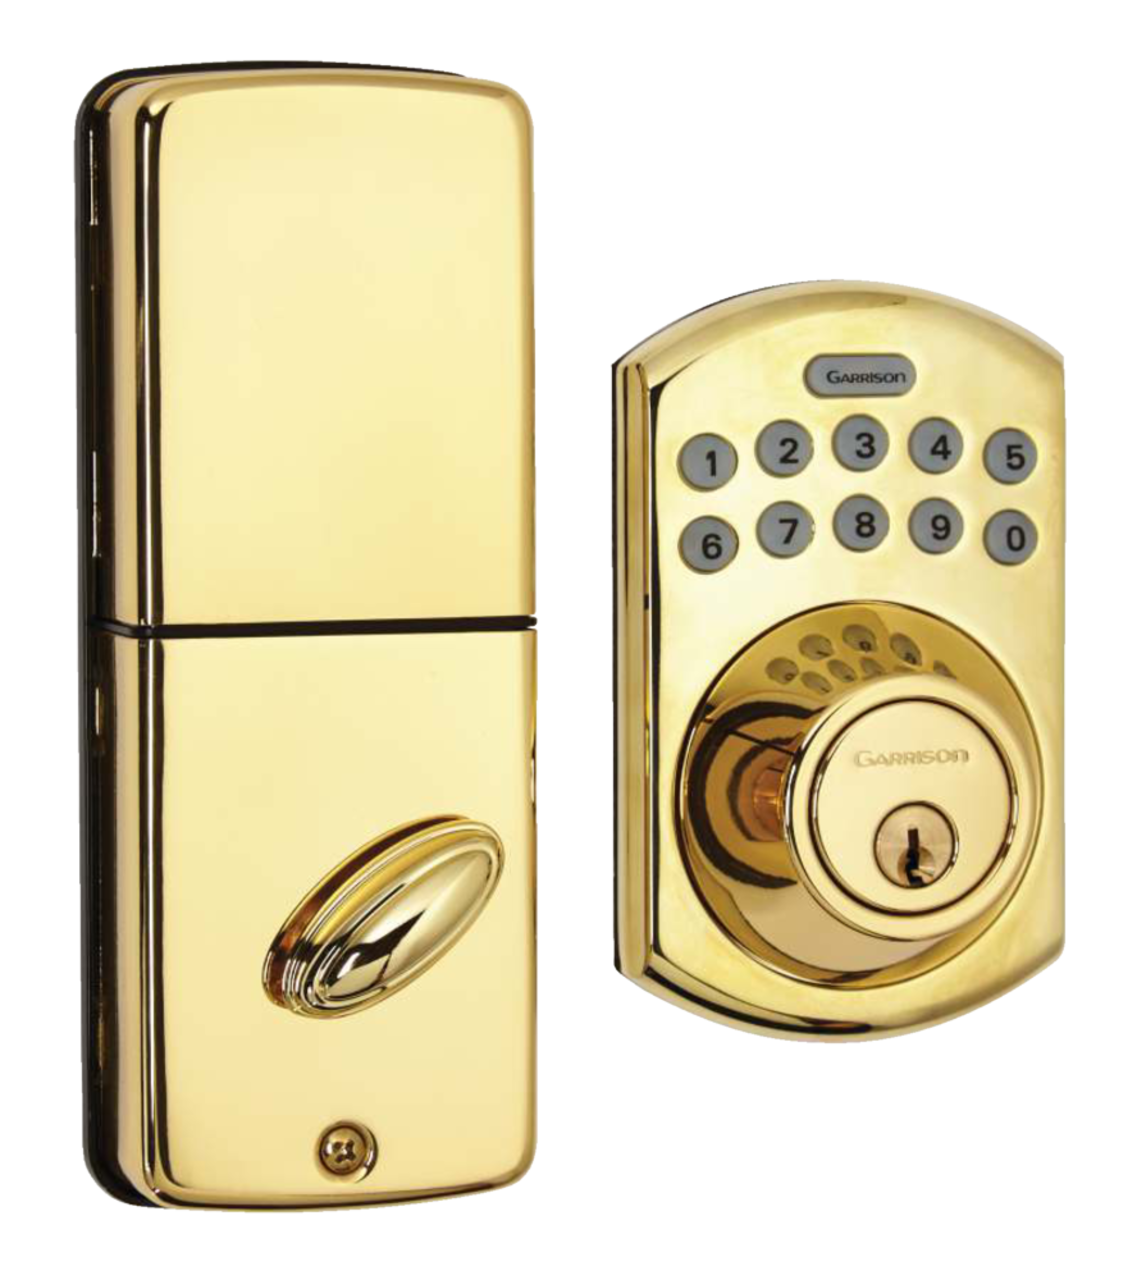 https://media-www.canadiantire.ca/product/fixing/hardware/curb-appeal/0467245/garrison-electronic-deadbolt-brass-a0fdddd6-b448-4846-8766-d1cf48210e4a.png?imdensity=1&imwidth=640&impolicy=mZoom